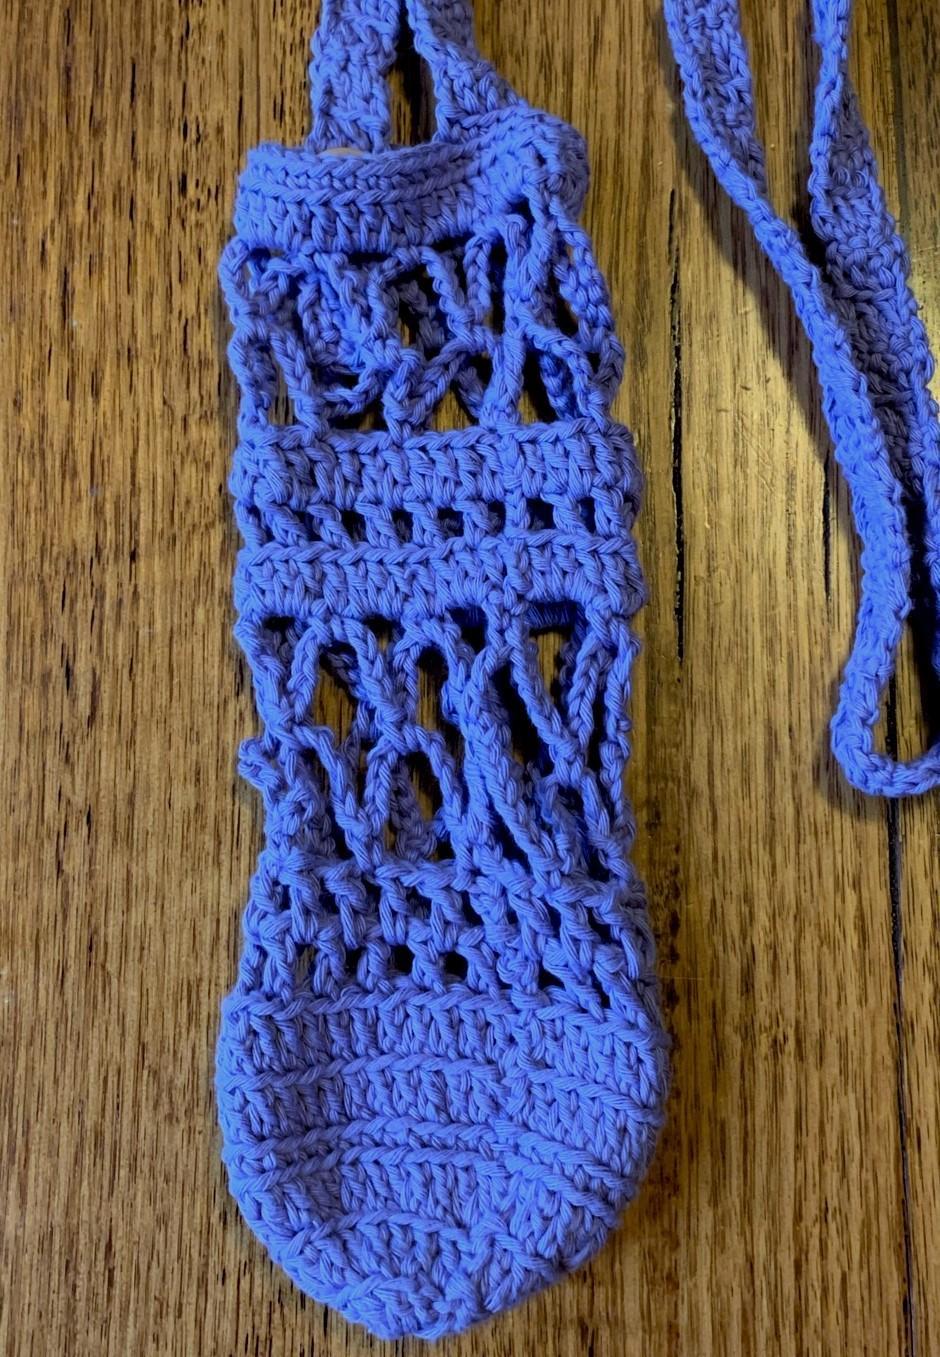 Crochet Bottle Holder - Here and There Makers